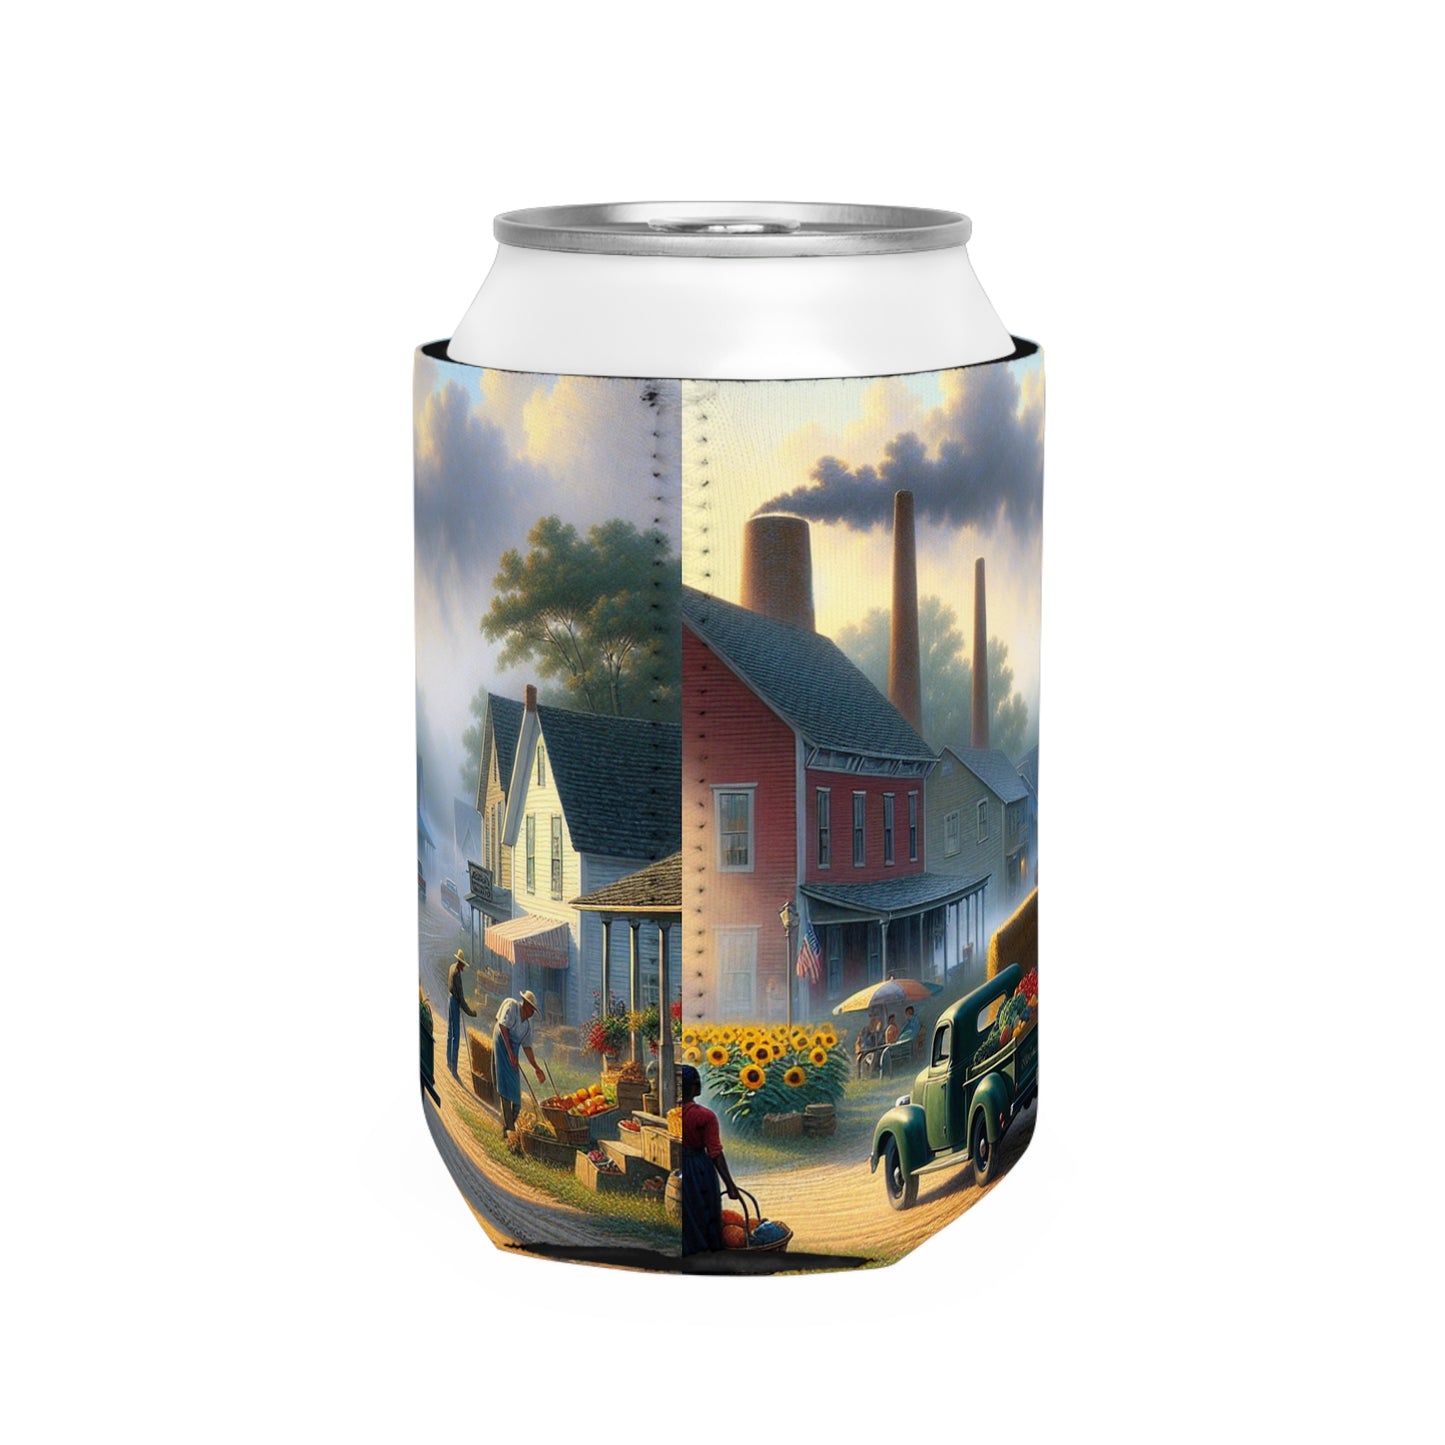 "Harvest Tranquility: A Midwest Farm Scene" - The Alien Can Cooler Sleeve Regionalism